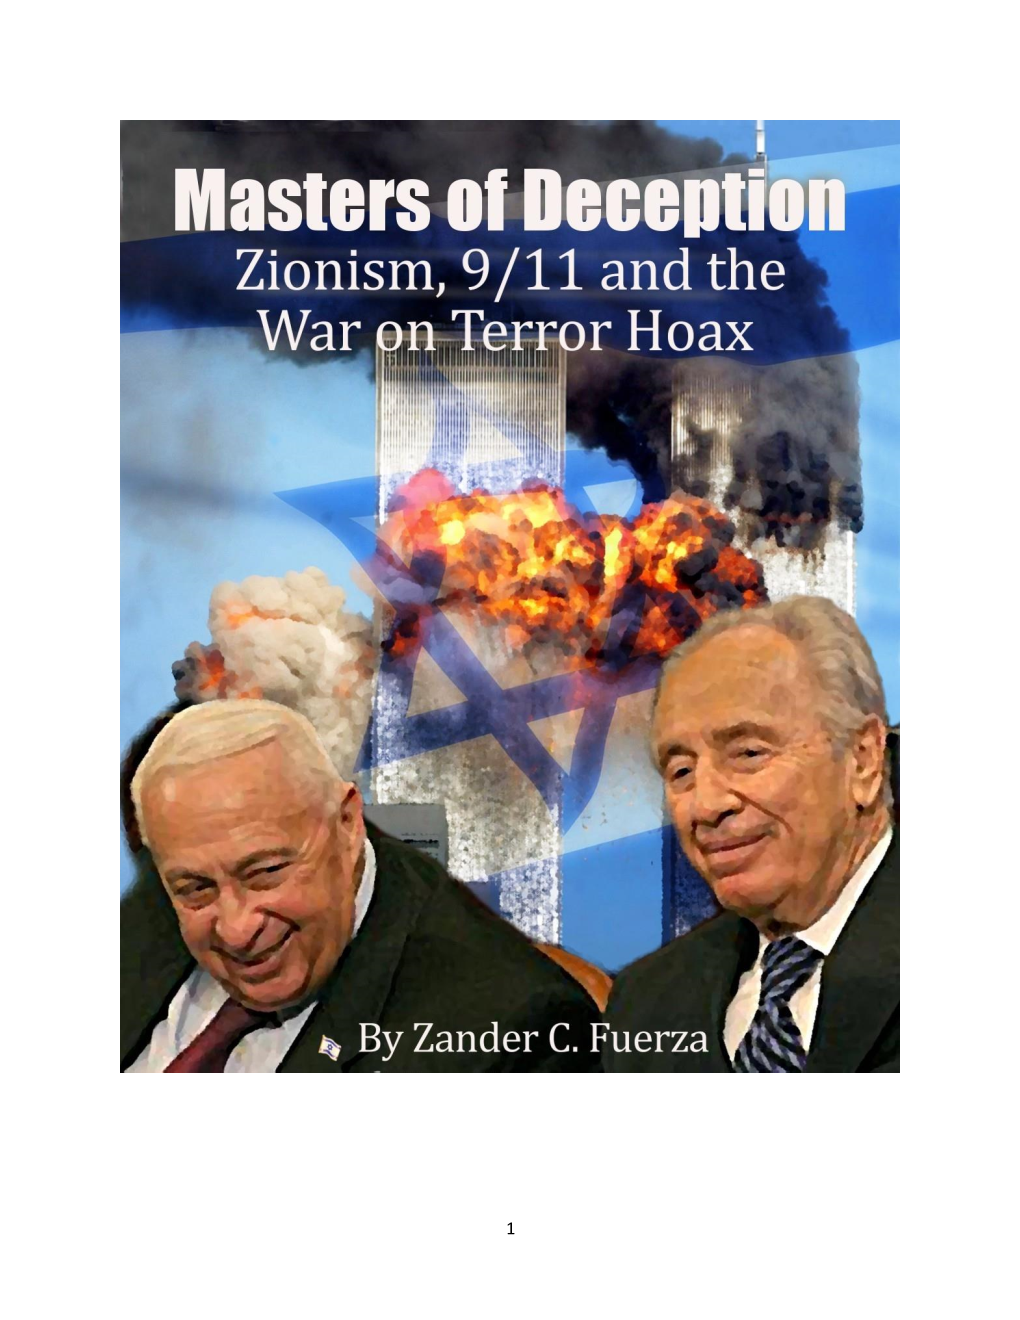 Masters of Deception: Zionism, 9/11 and the War on Terror Hoax by Zander C